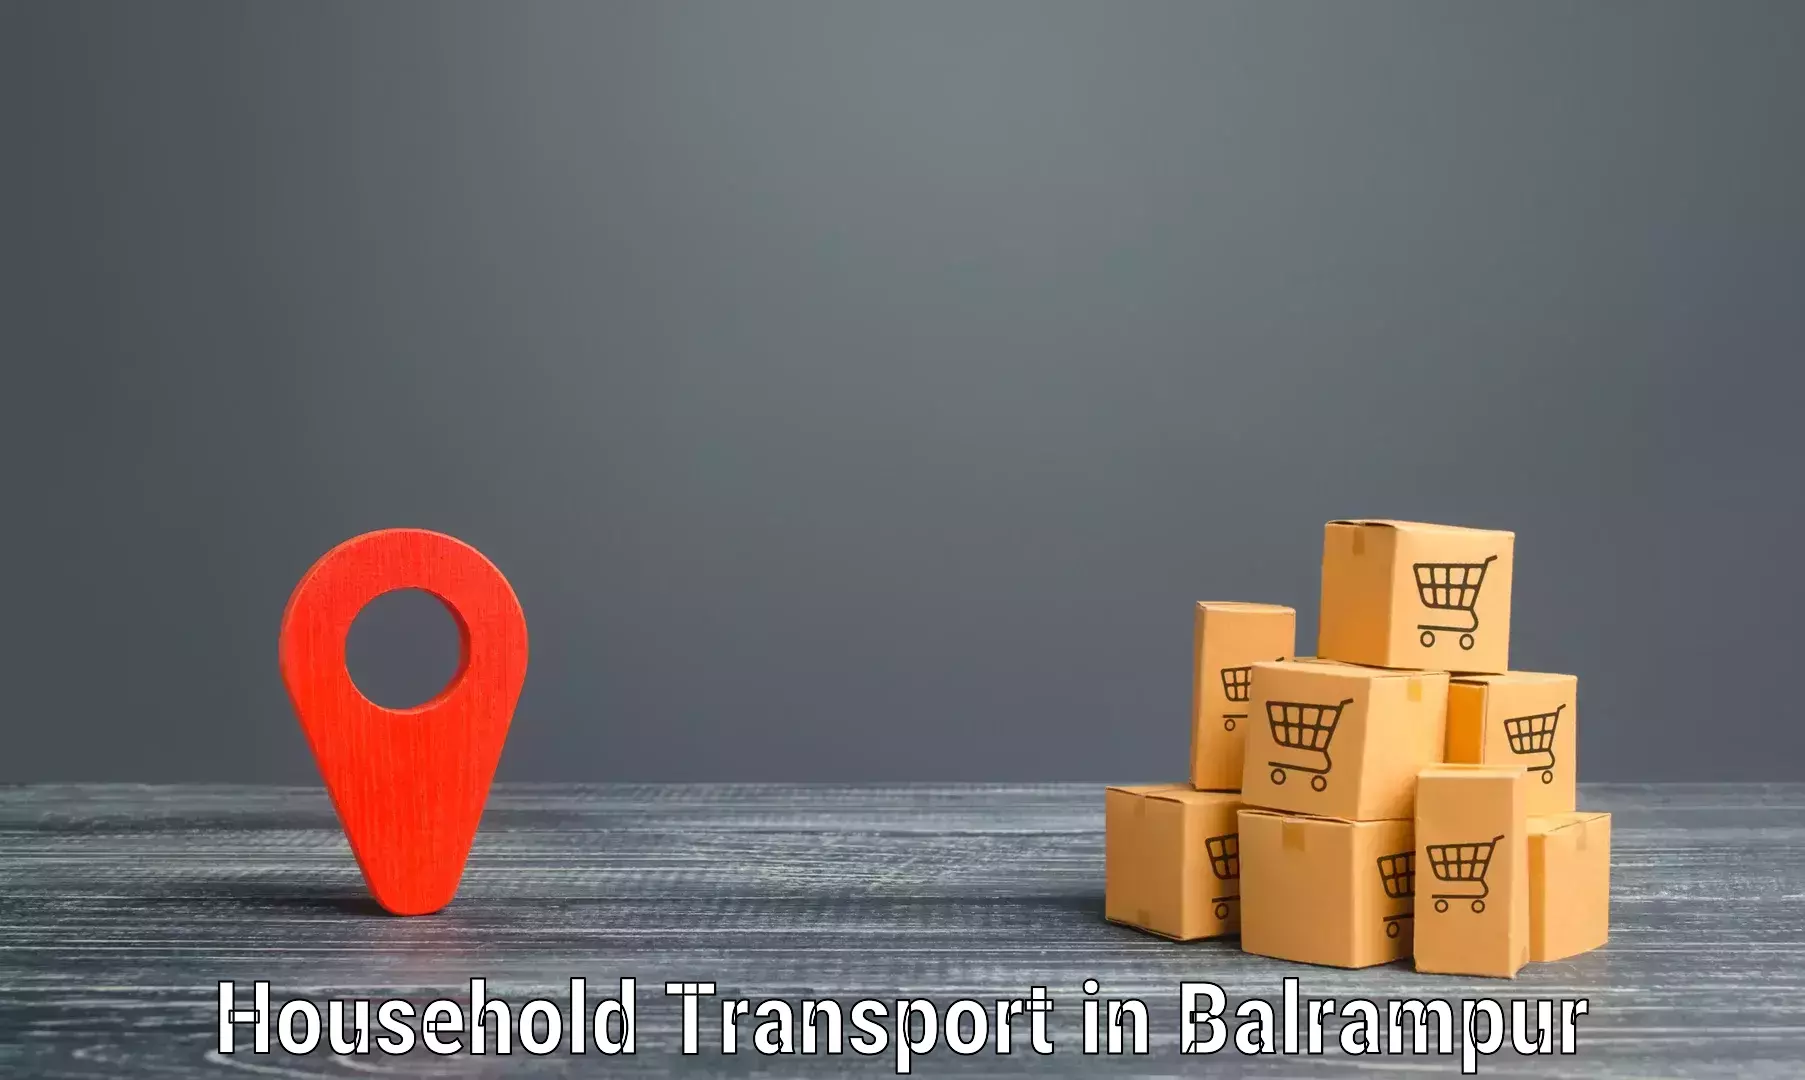 Specialized household transport in Balrampur